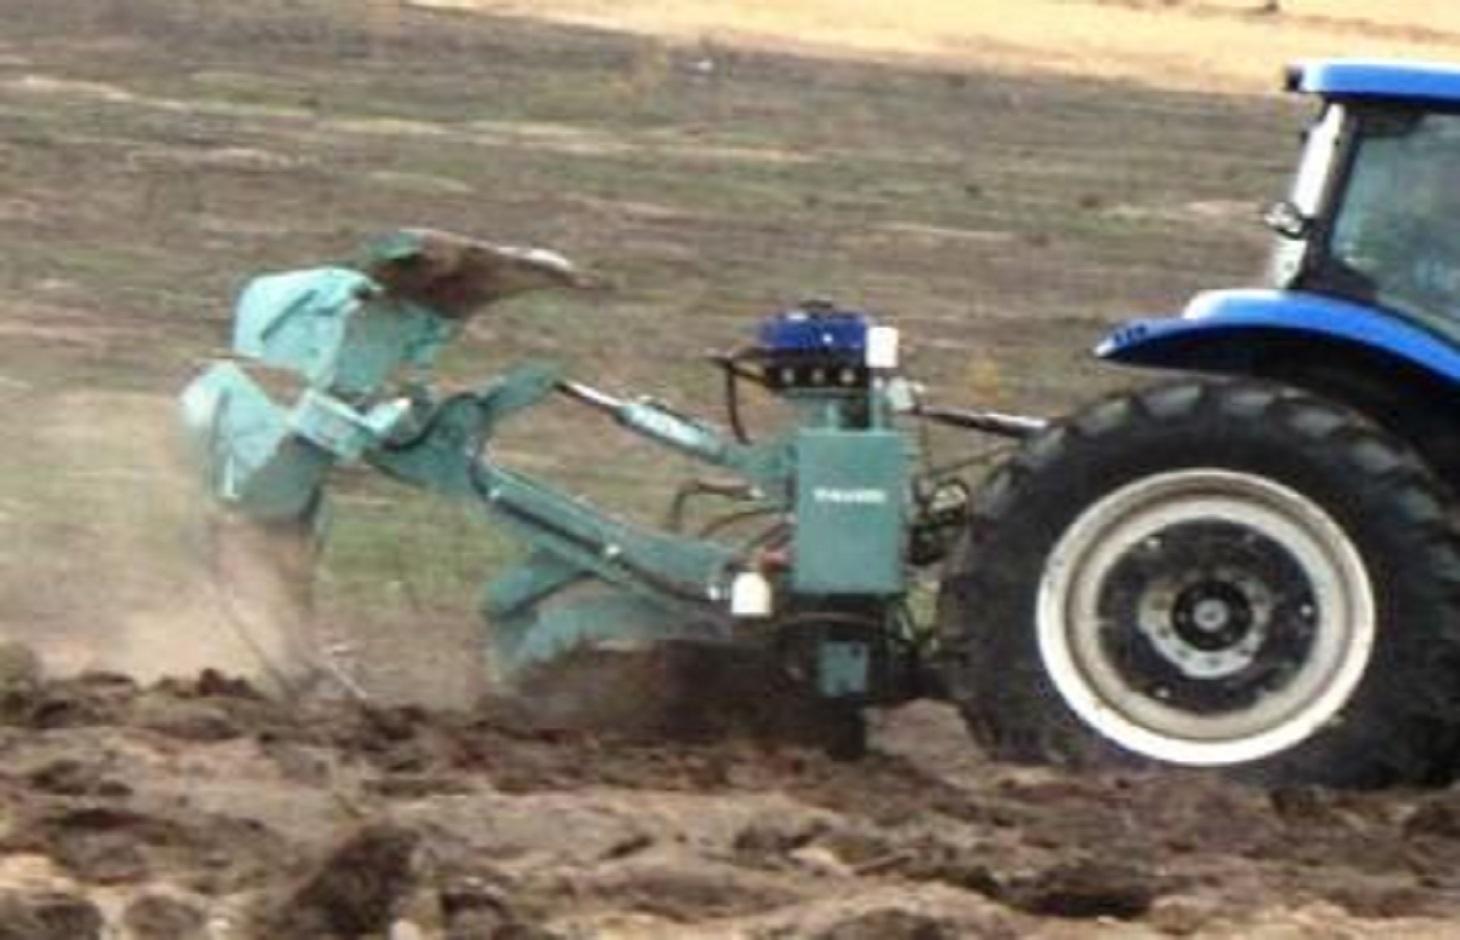 The Delfino3 plough at work. The picture shows the moment in which, after digging a micro bassin, the plowshare is coming out of the soil while the two rippers are going deeper in creating the underground water bag.